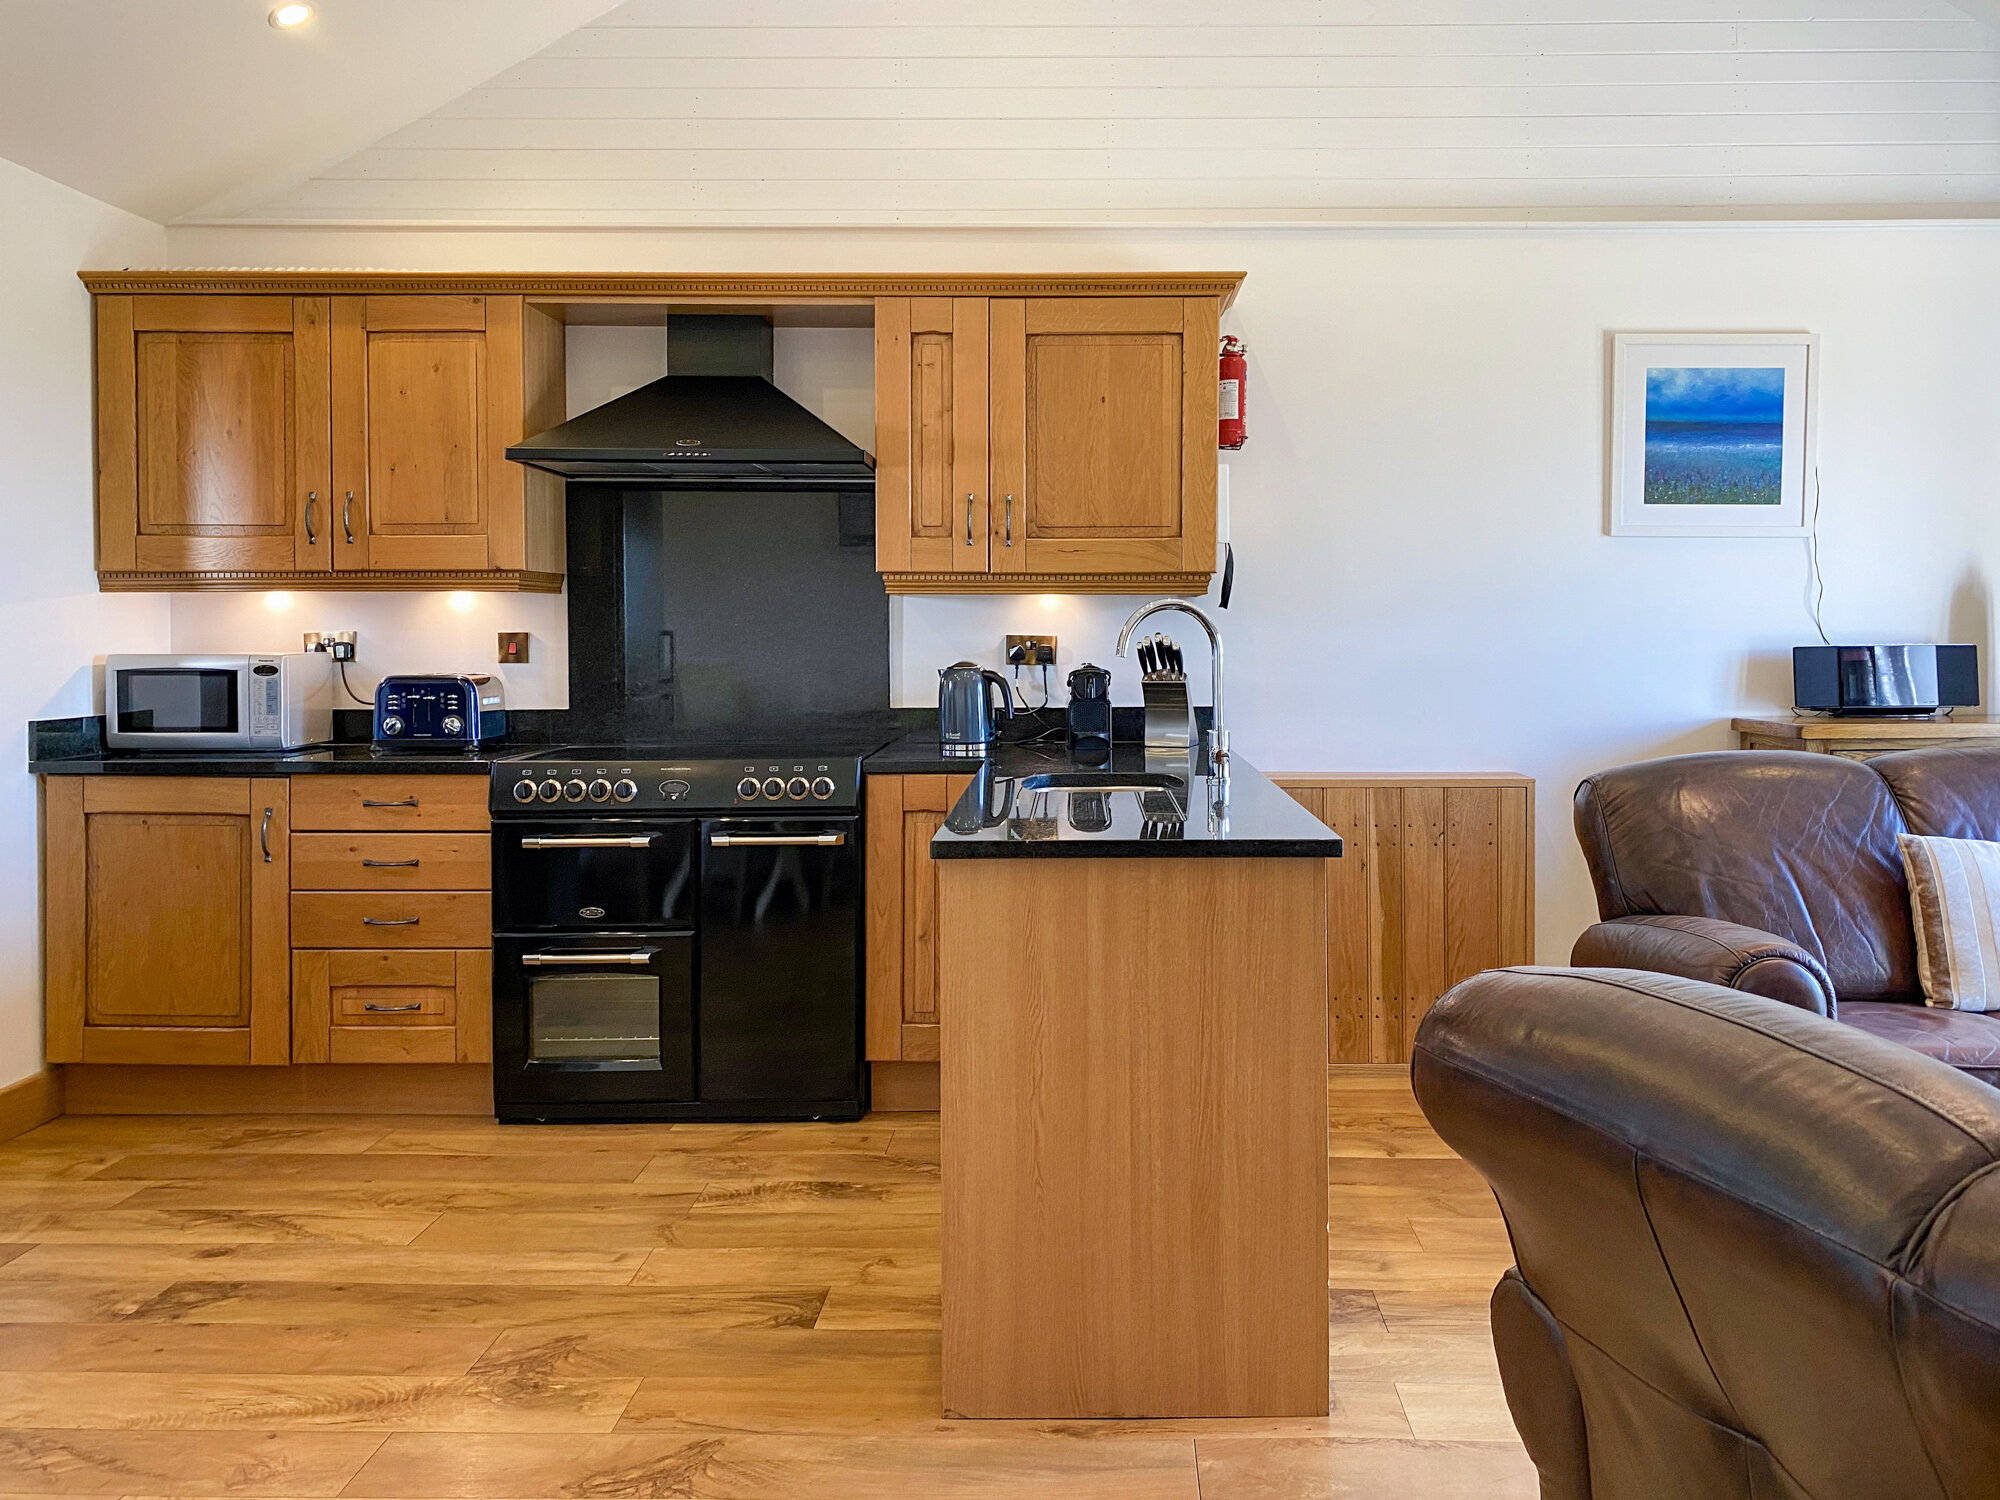 Self-catering fully equipped kitchen and granite worktops